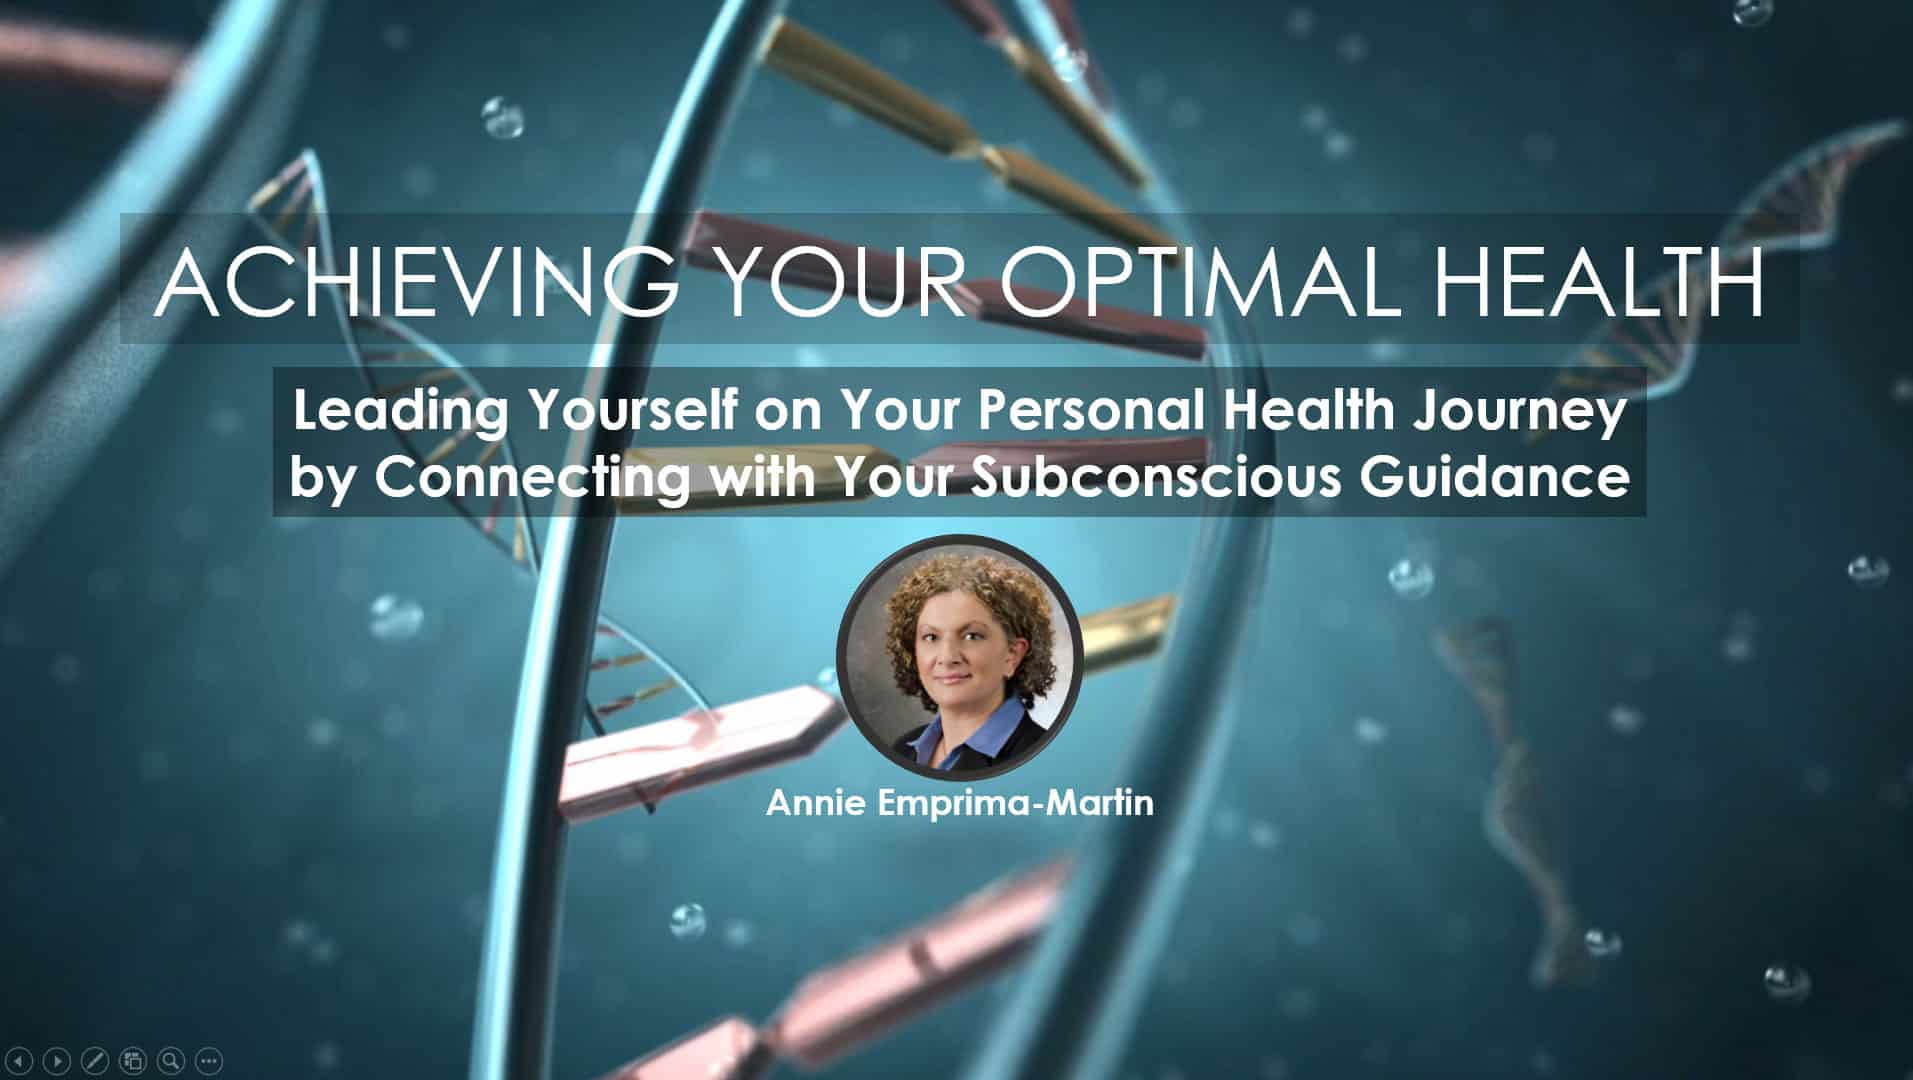 Leading Yourself on Your Health Journey, Annie Emprima-Martin